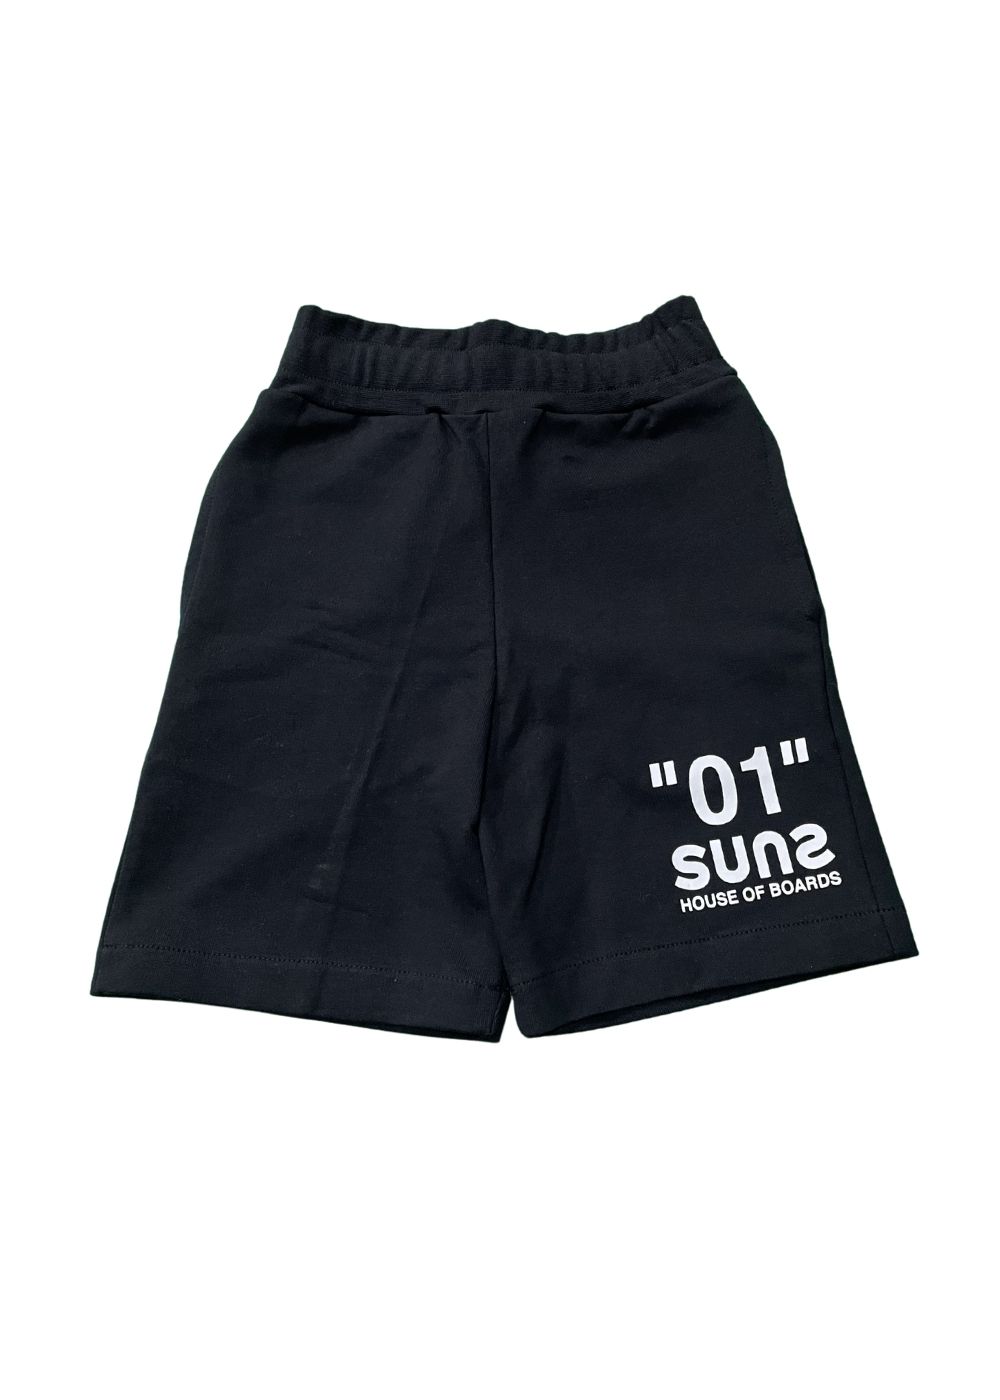 Featured image for “SUNS SHORTS NERO STAMPA”